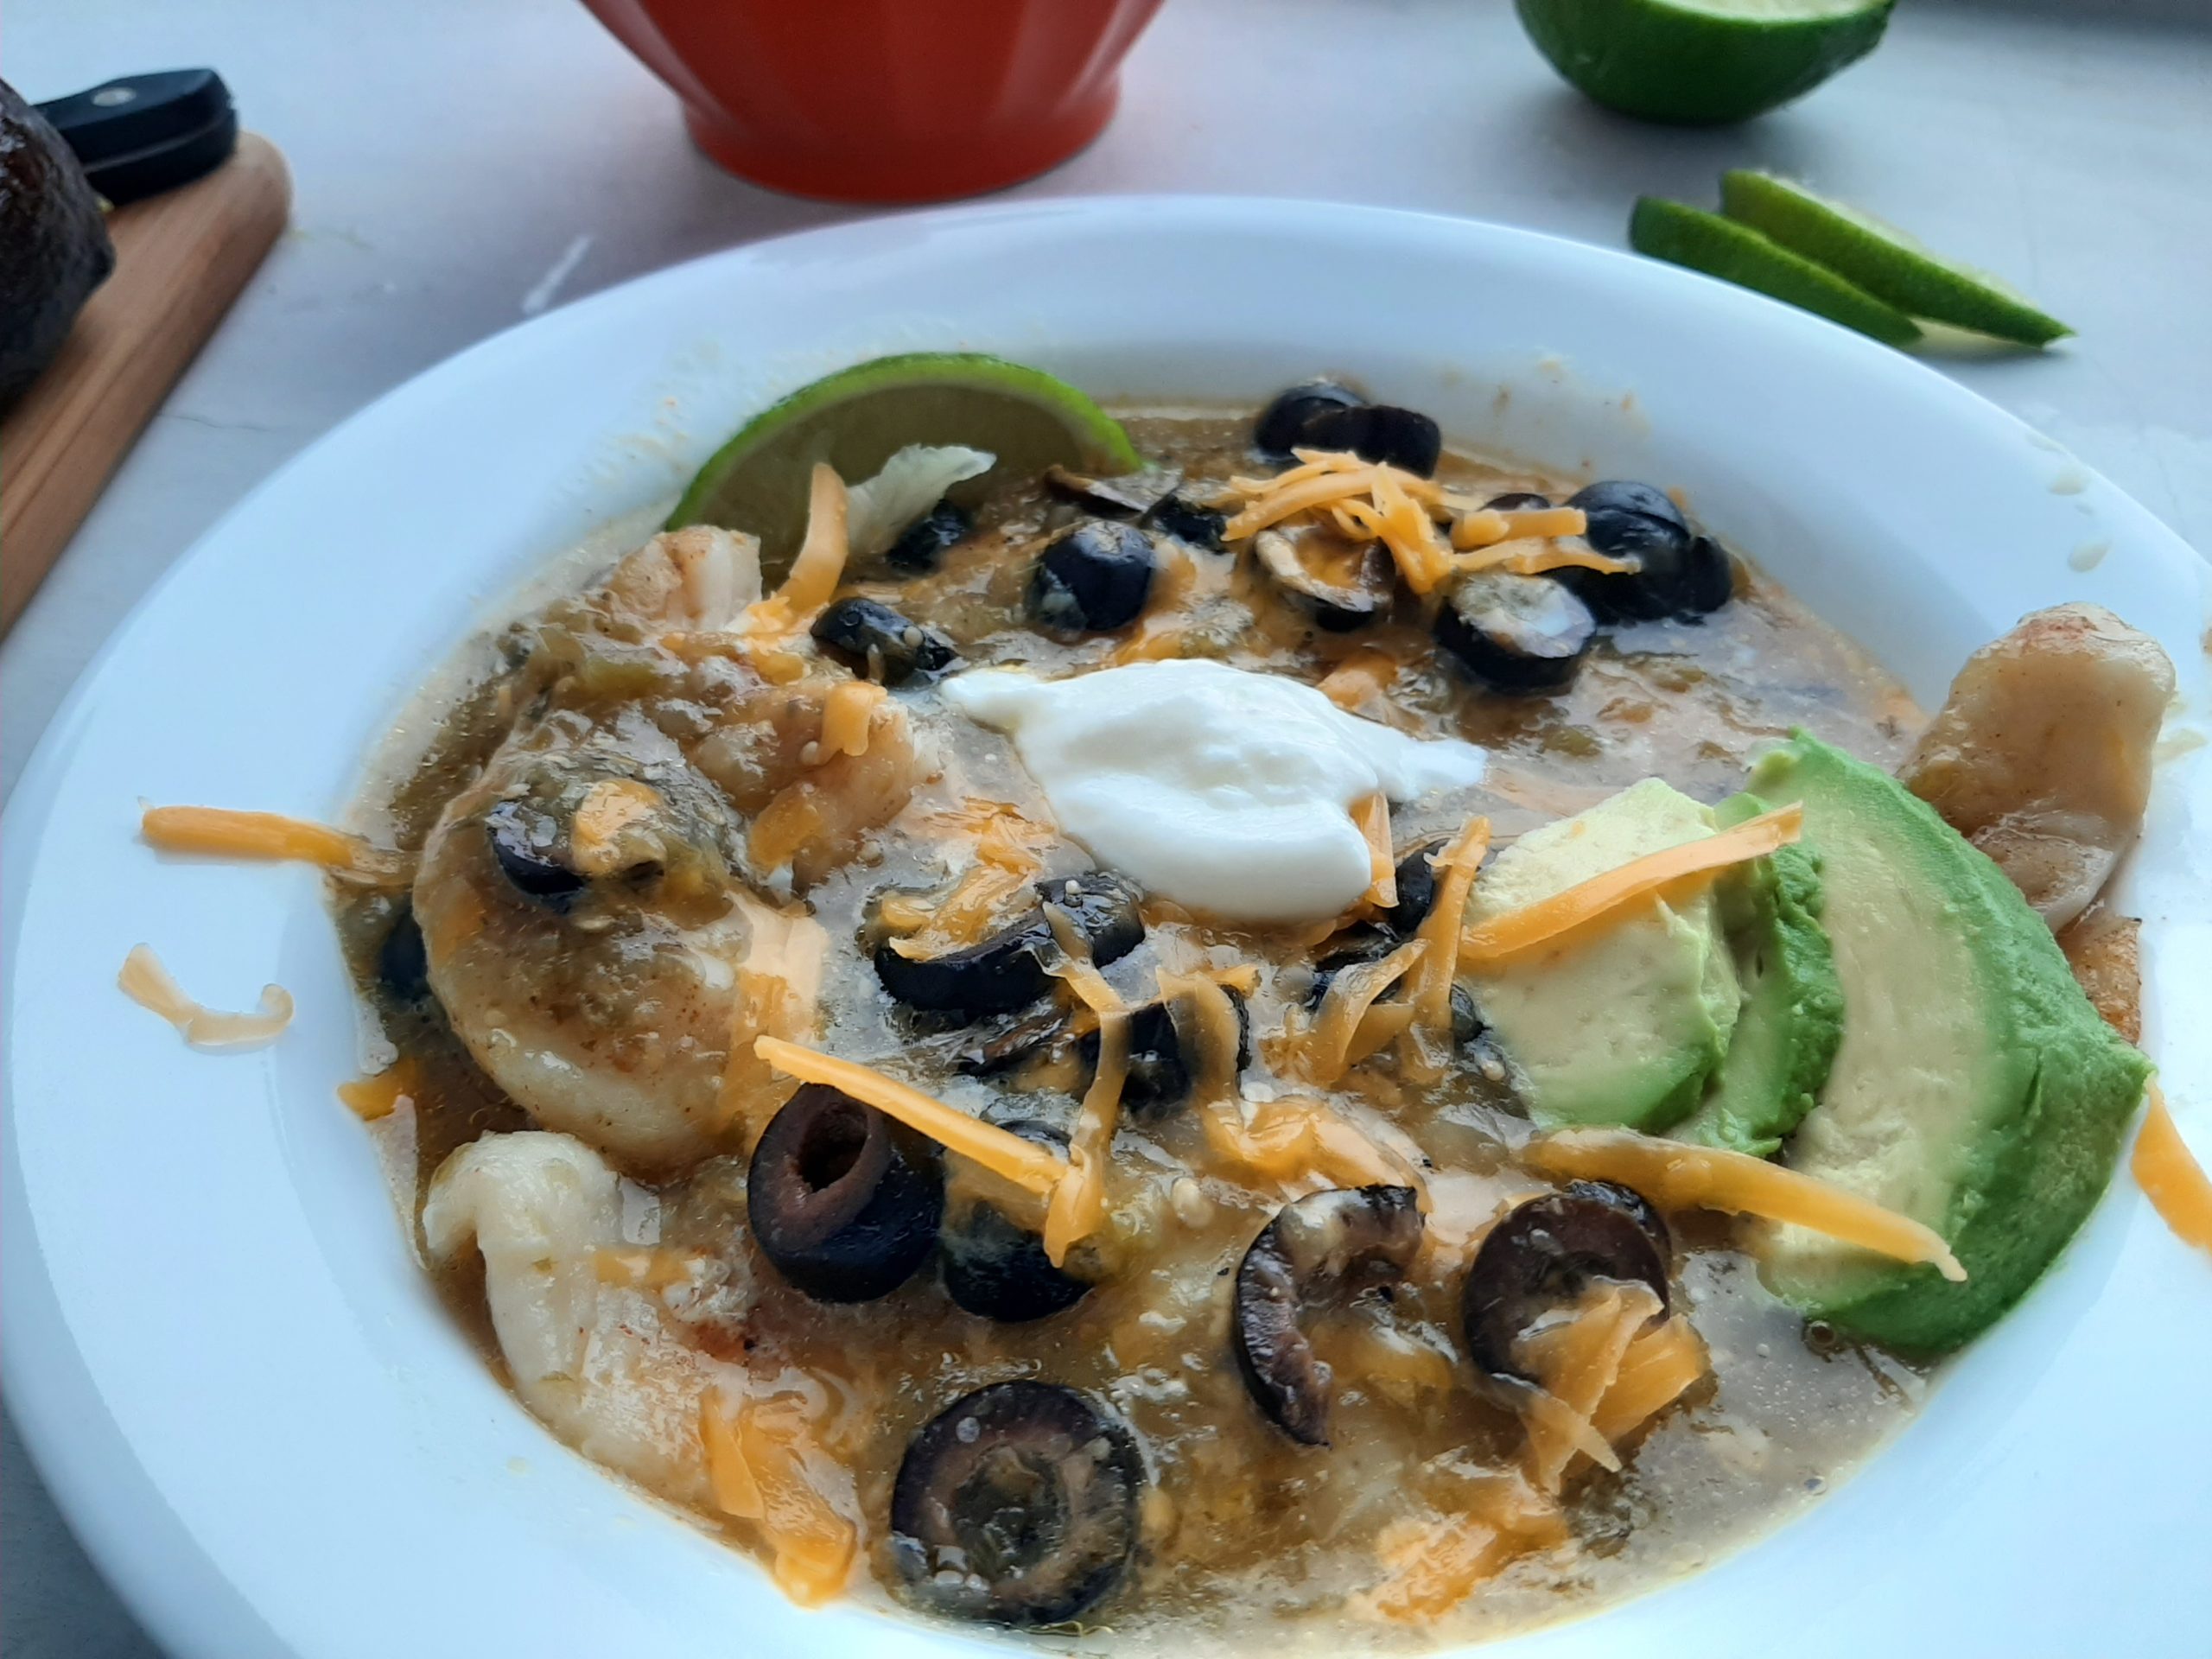 Spicy basa casserole with tomatillo sauce, cheddar cheese, black olives, and lime slices in a white bowl. Woman's hand holding fork above with piece of fish. Surrounded by lime slices, avocado, and taco salad.